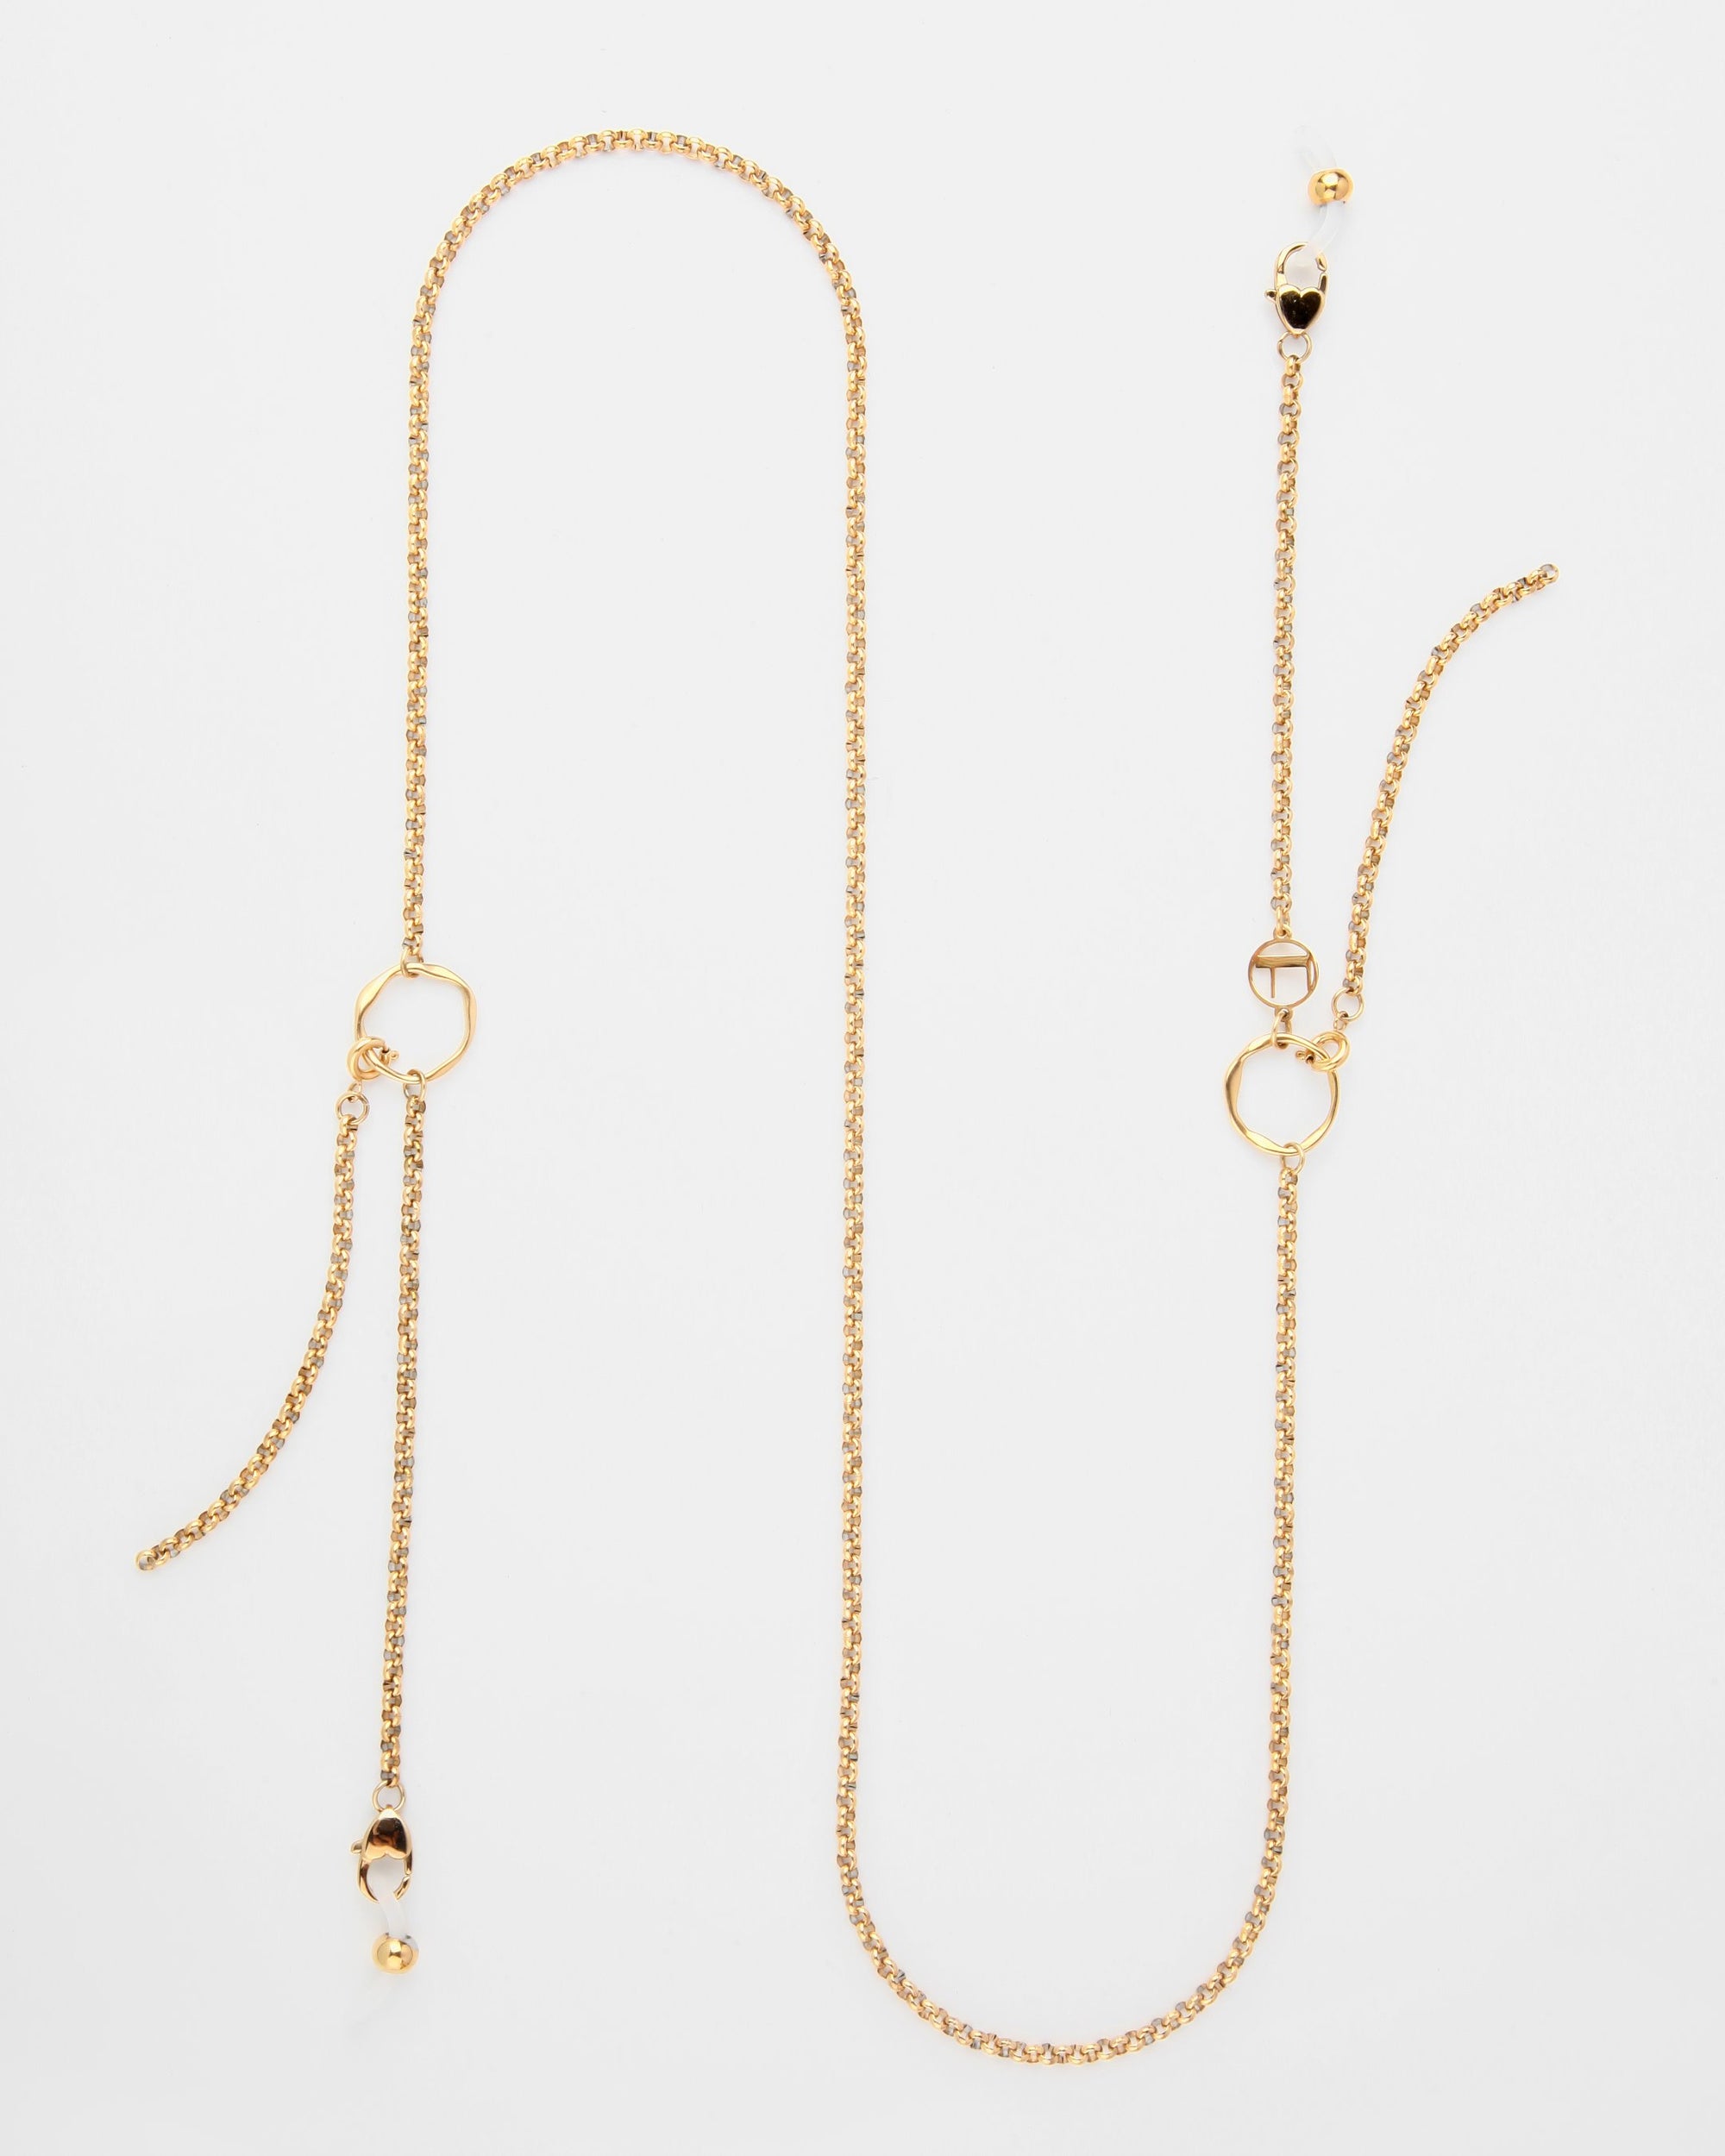 A long 18K gold-plated chain necklace with two geometric-shaped pendants and beaded accents. The adjustable loops and clasp provide a perfect fit. The minimalist, sophisticated design is laid out against a plain white background, similar to the Florentina Glasses Chain by For Art's Sake®.